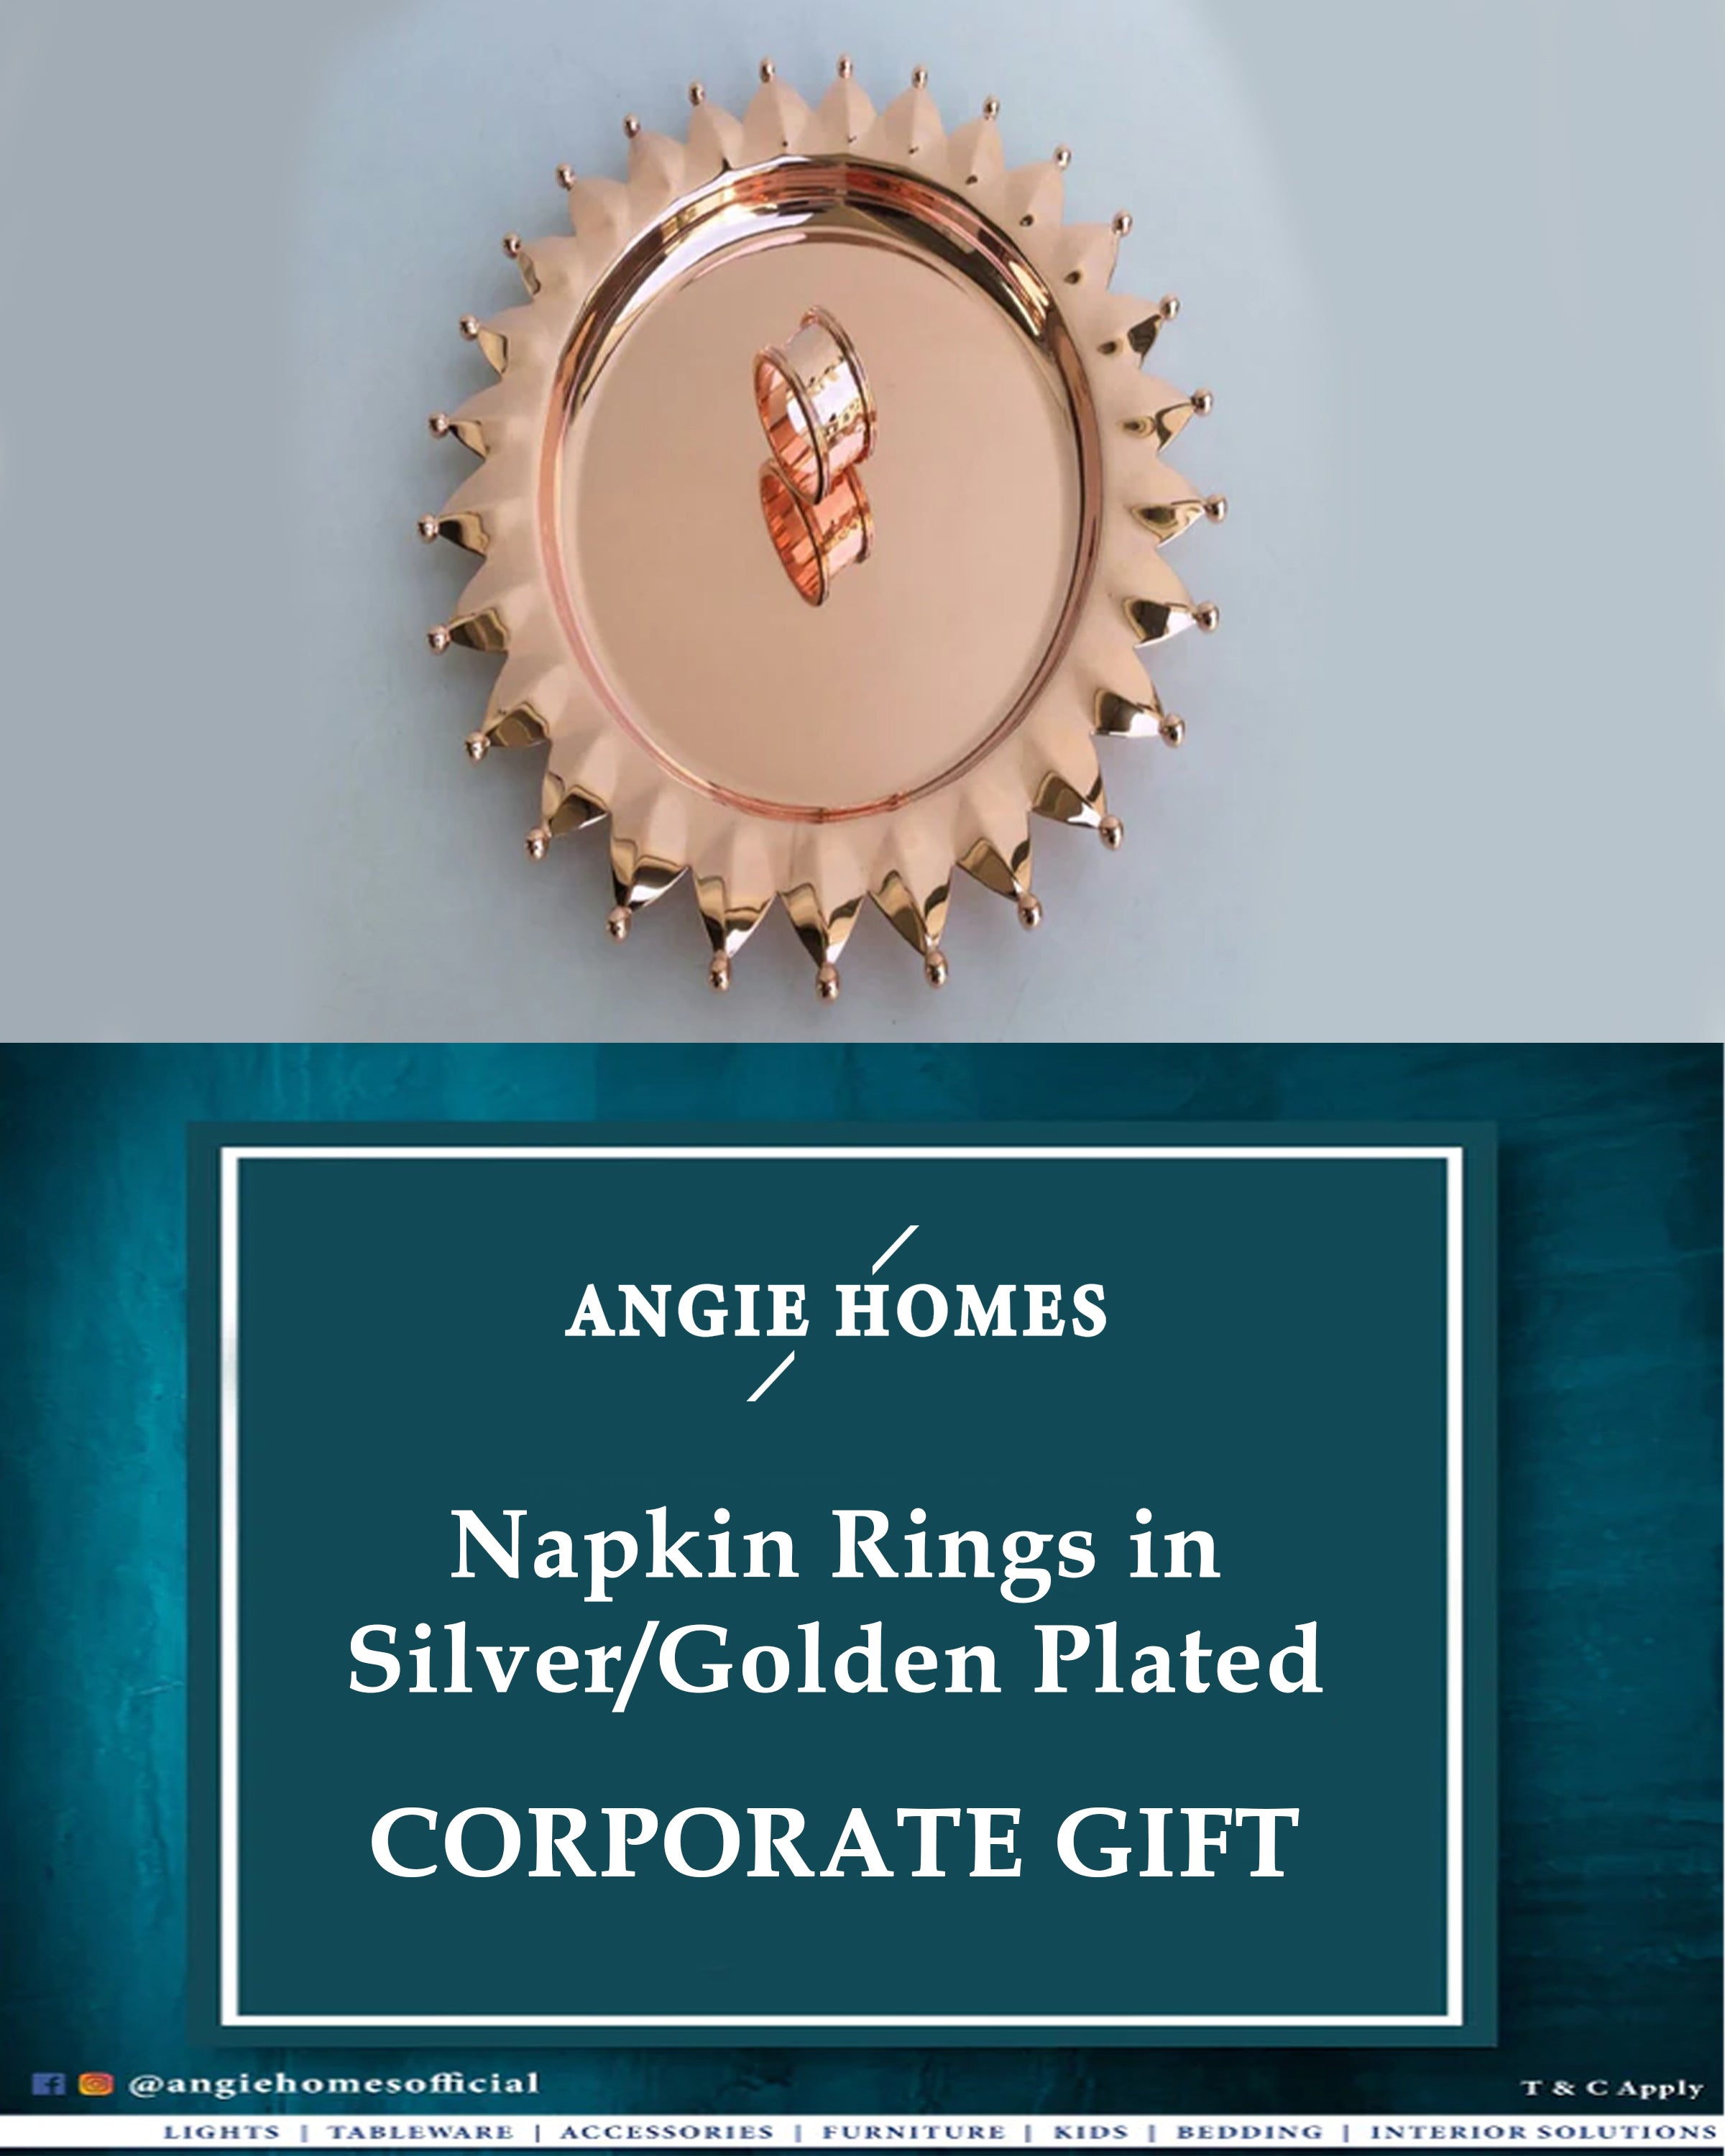 Charger Plate in Silver/Gold Finish Plated for Wedding, House Warming & Corporate Gift ANGIE HOMES